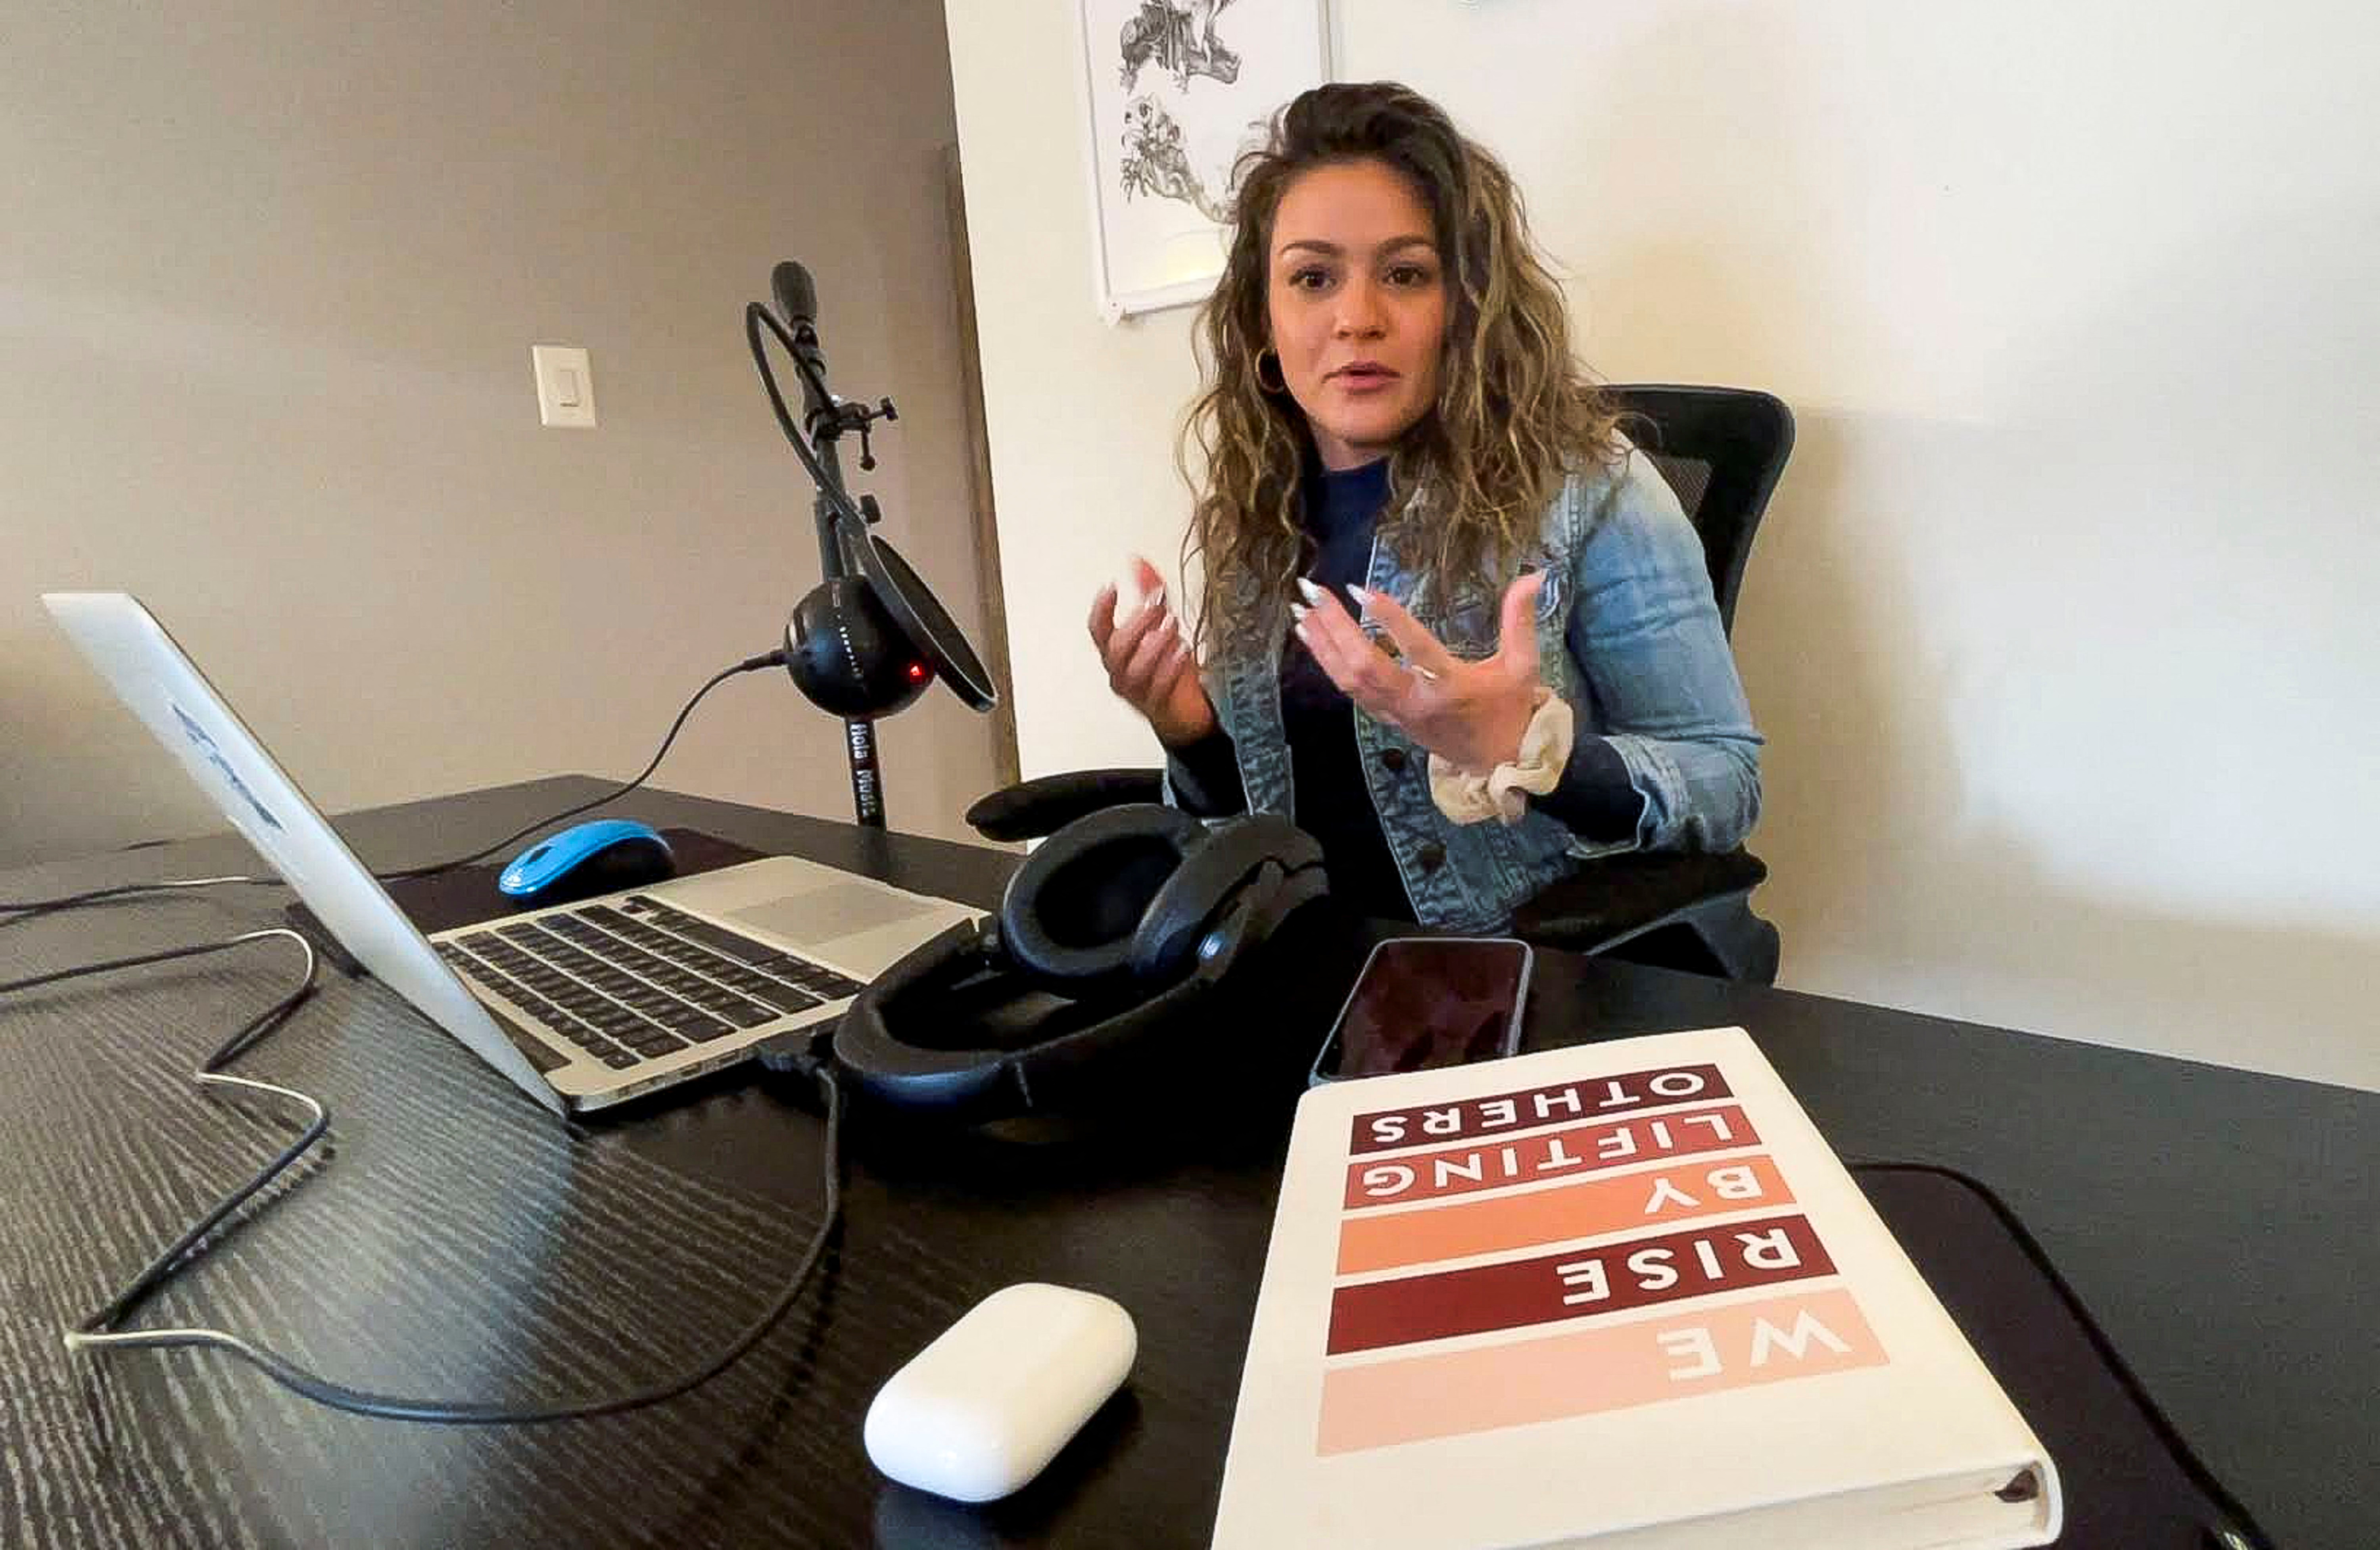 Gabby Ianniello works on her podcast in New York City